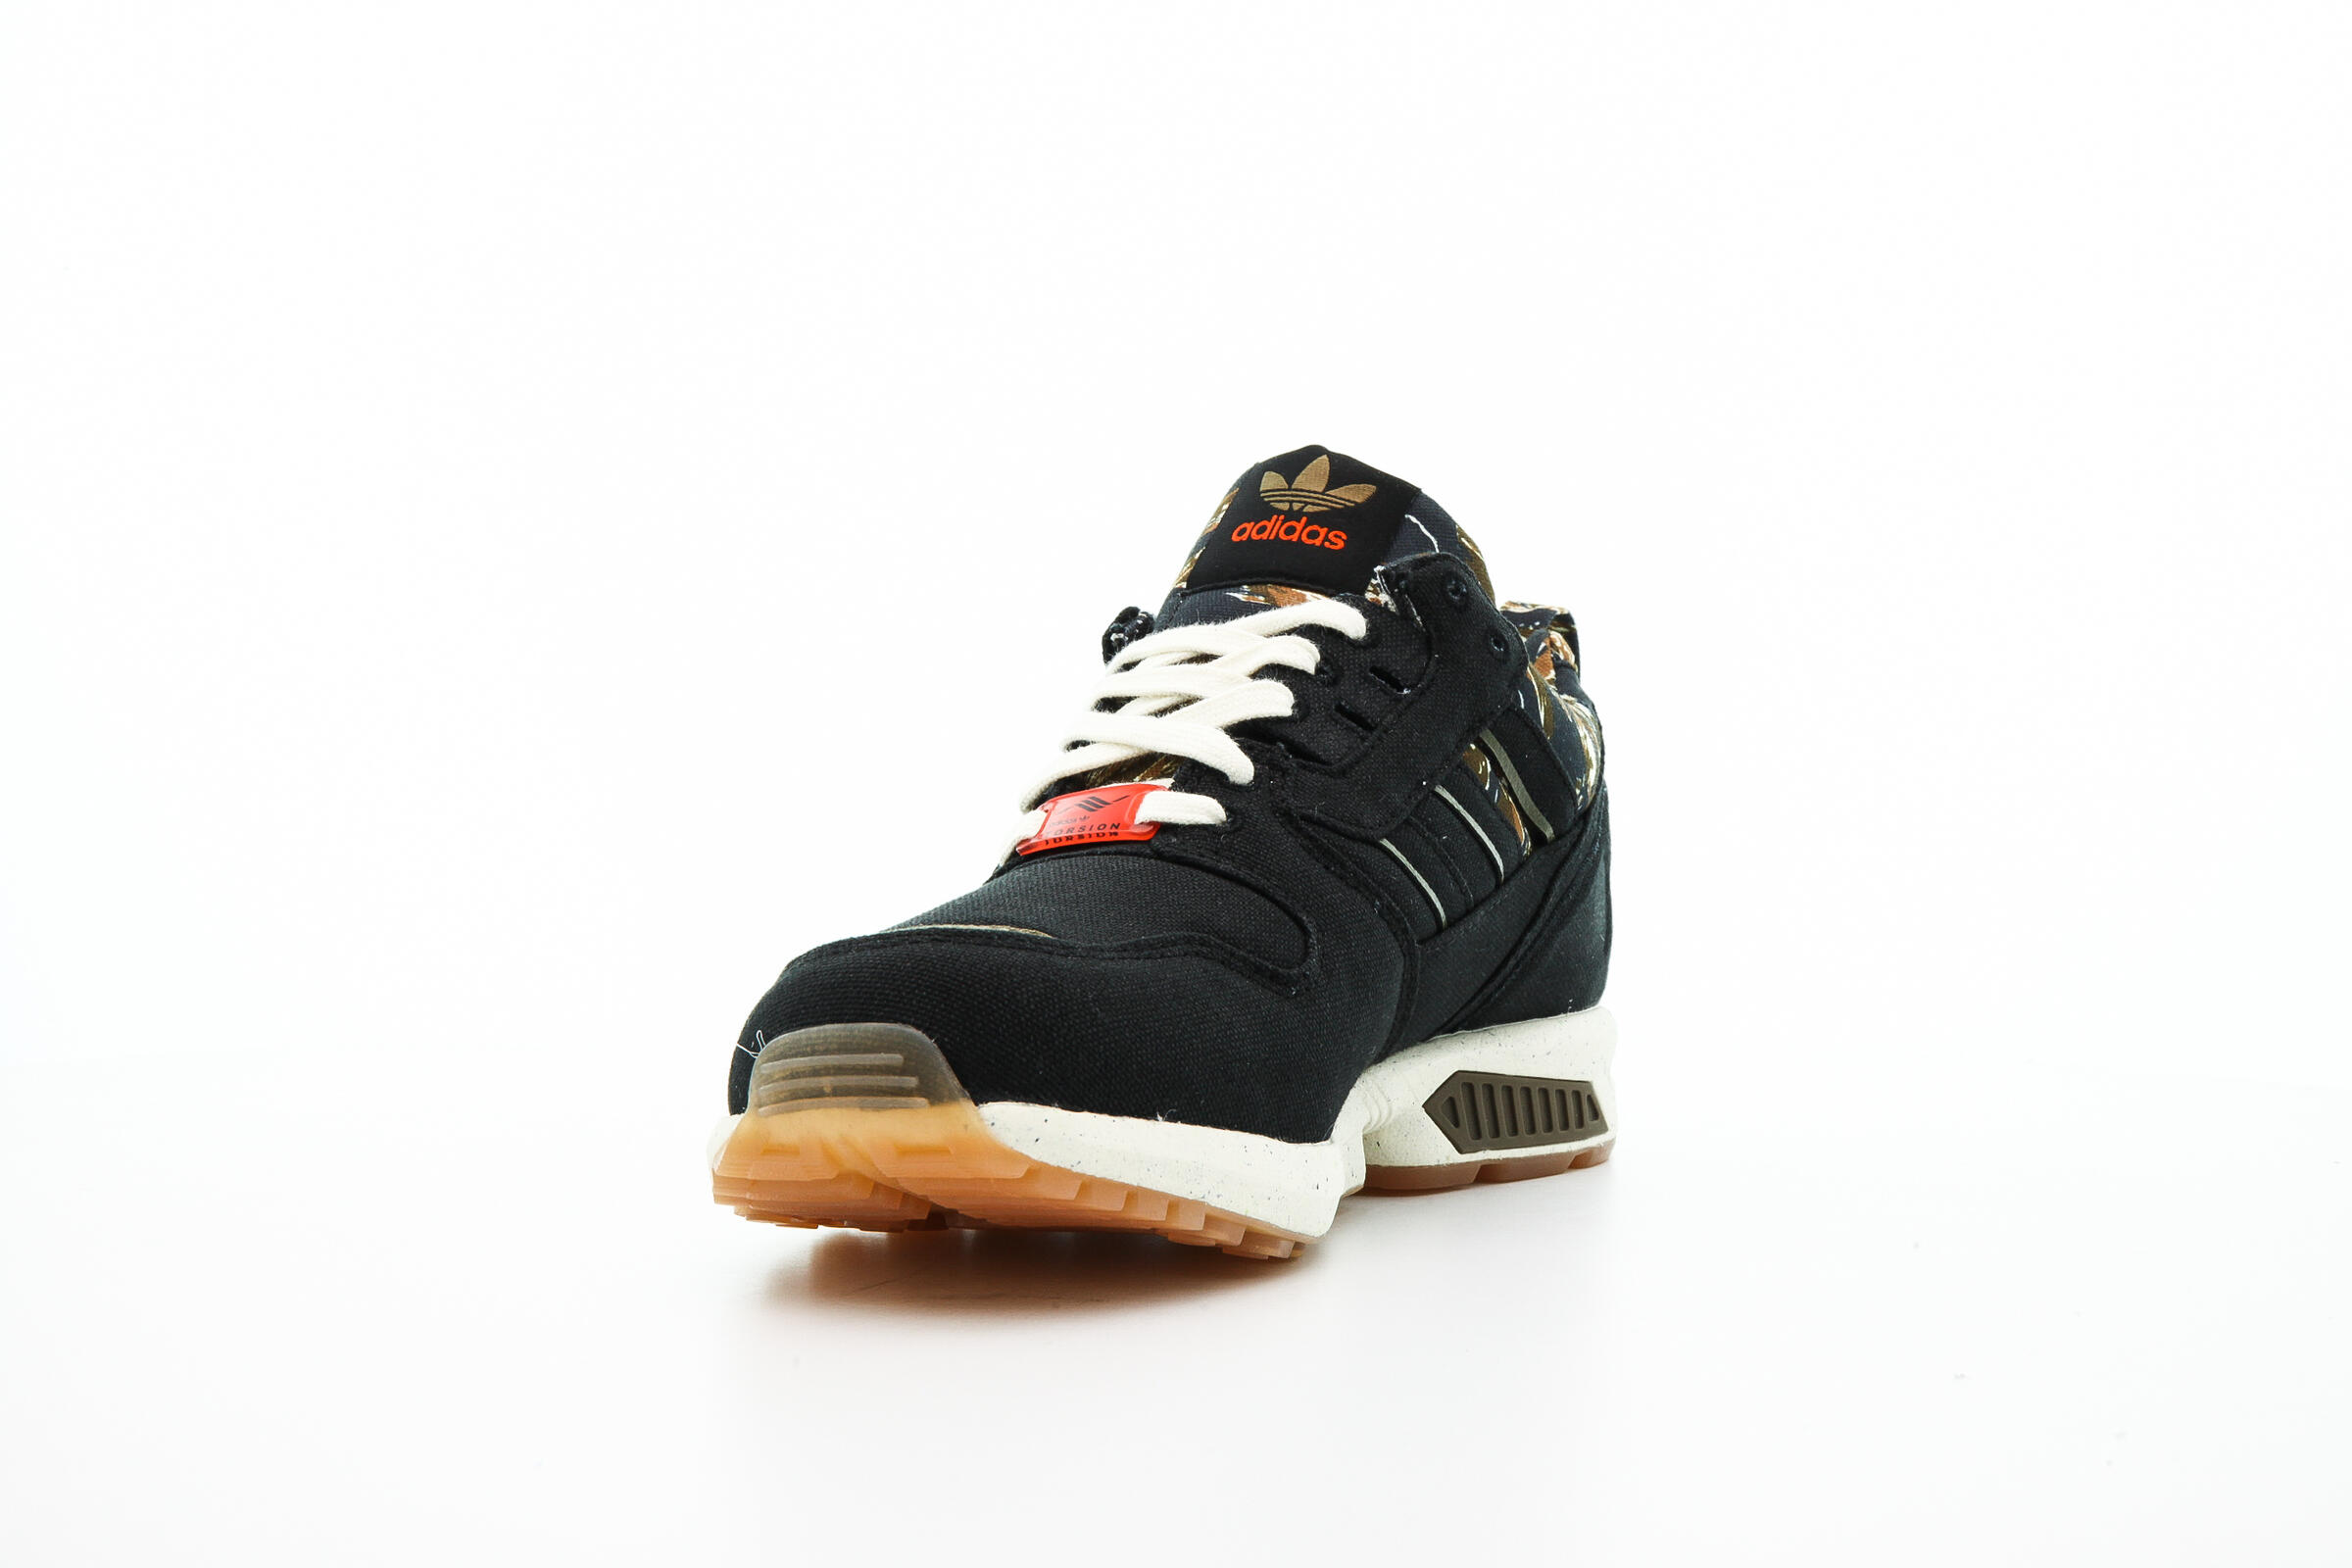 adidas Originals ZX8000 OUT THERE "BLACK"